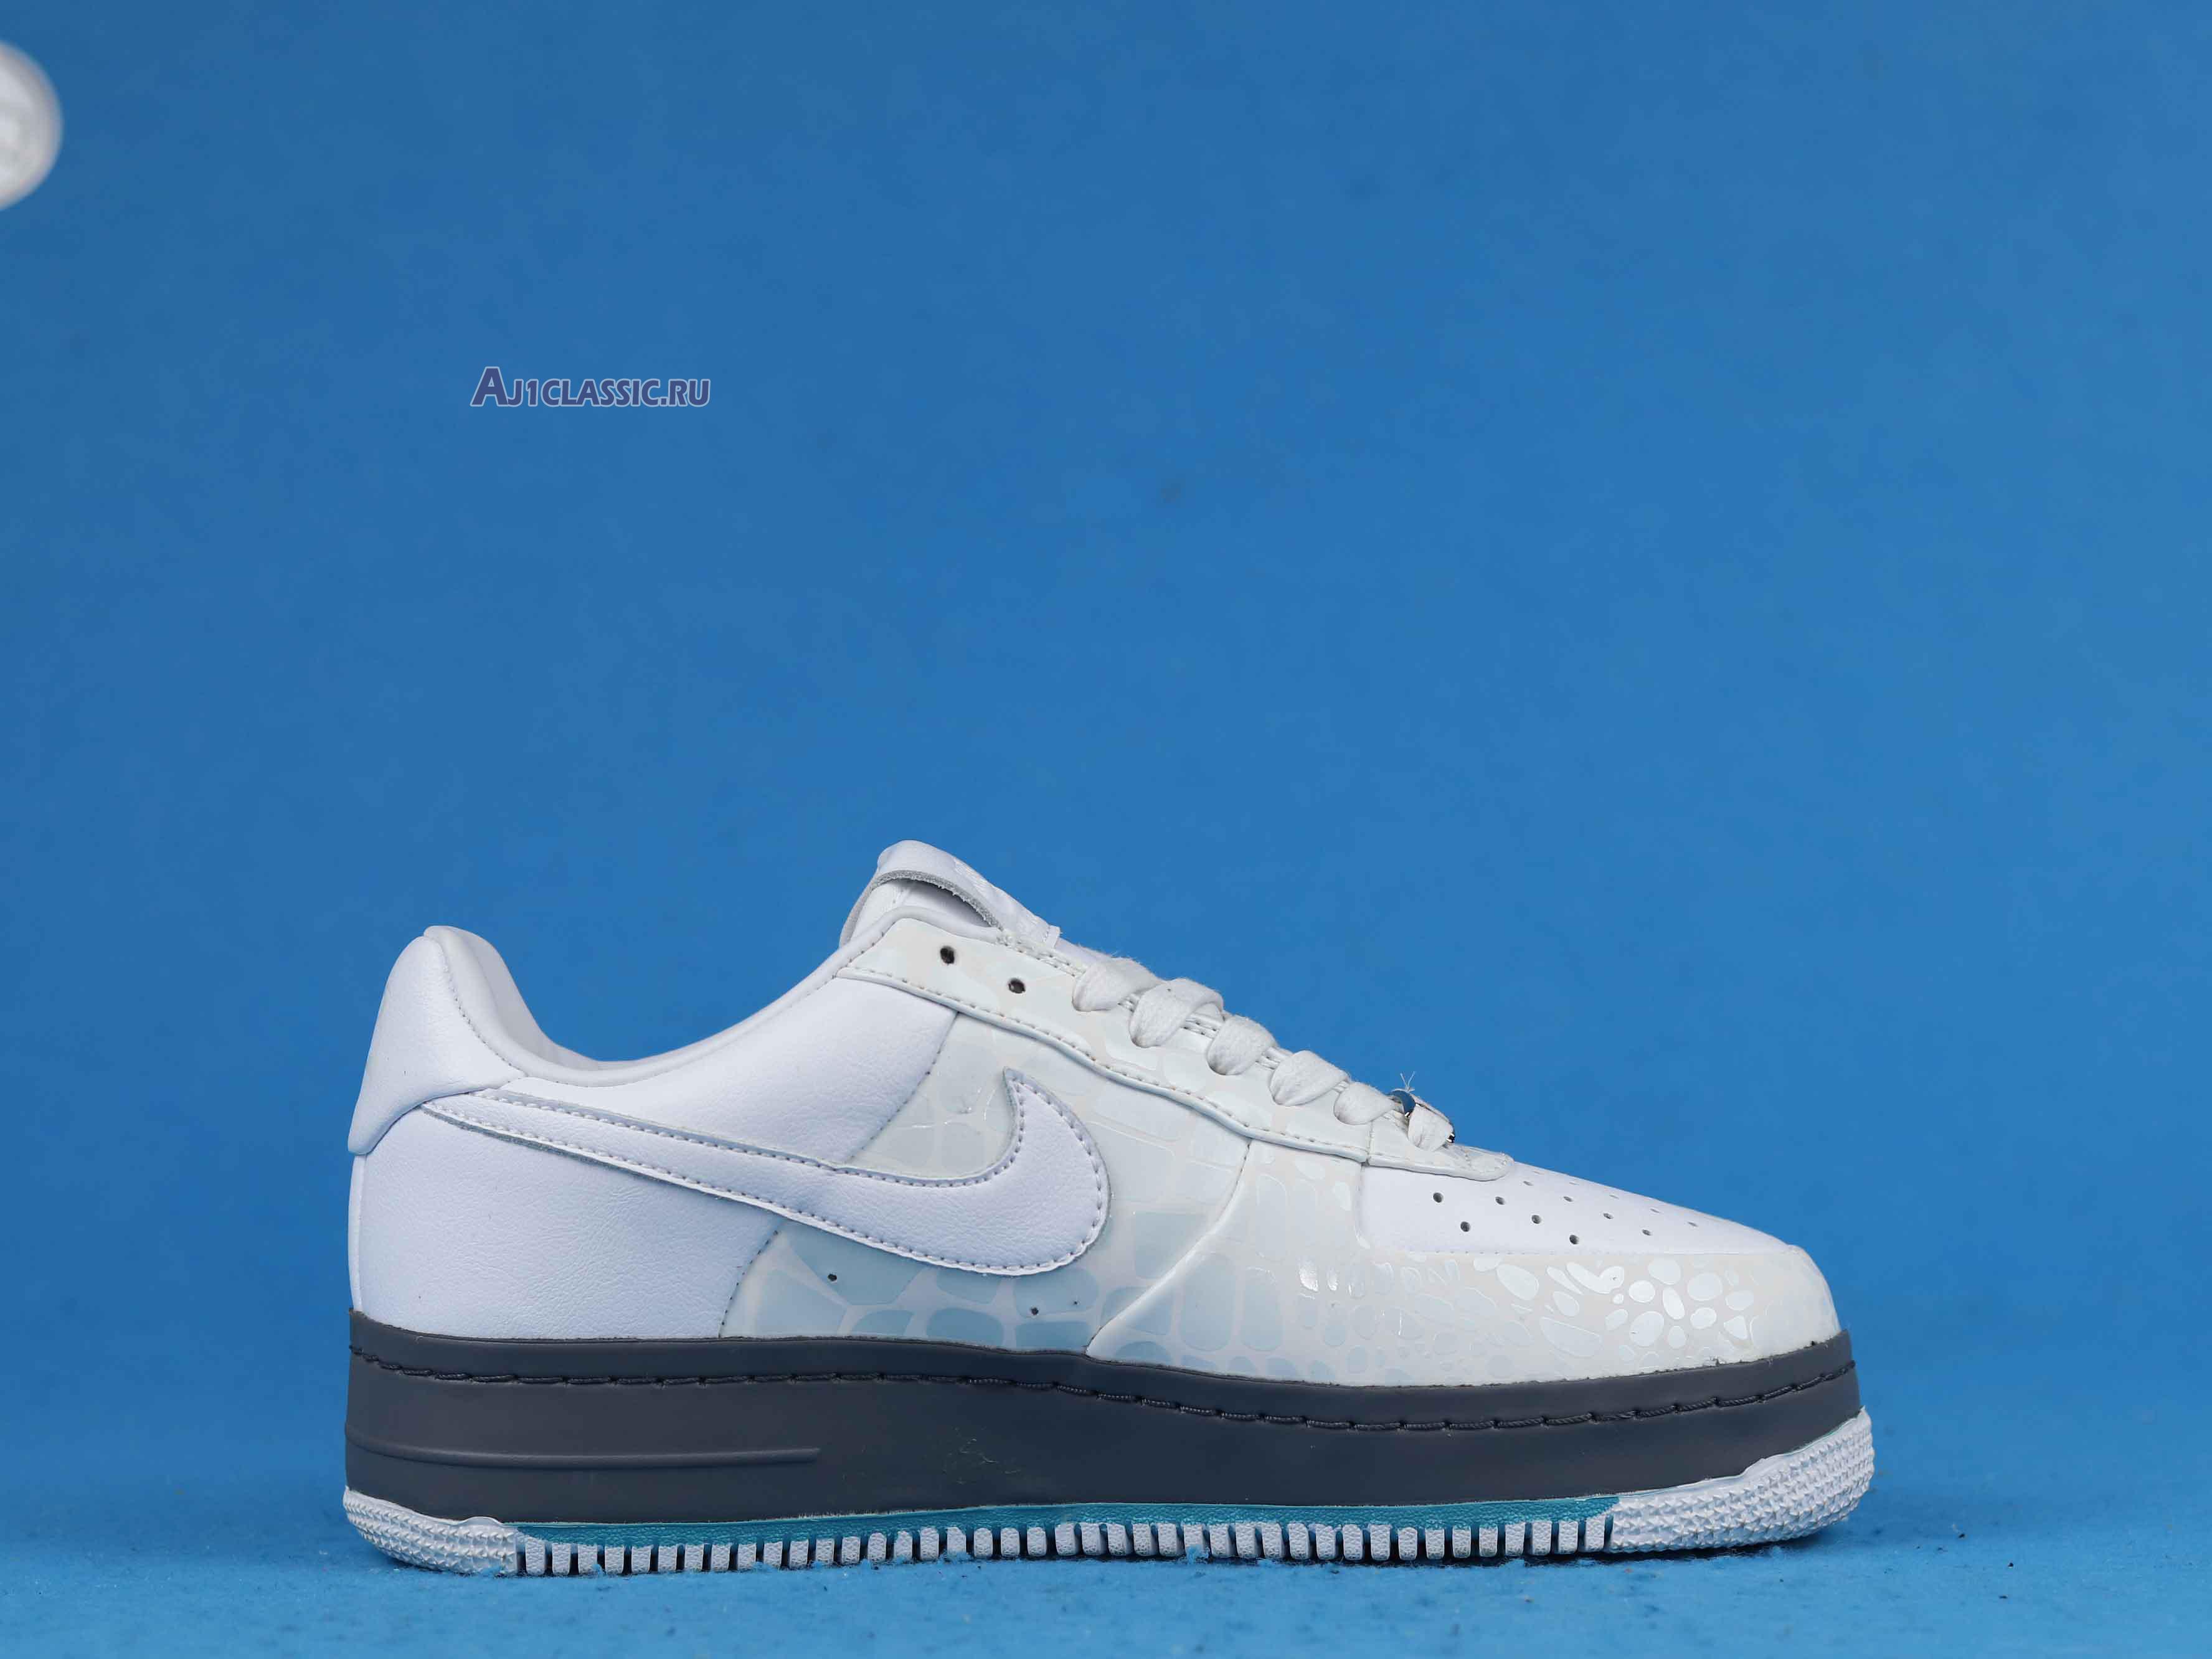 Nike Air Force 1 Sprm Mco I/O 07 "Rosies Dry Goods" 316077-111